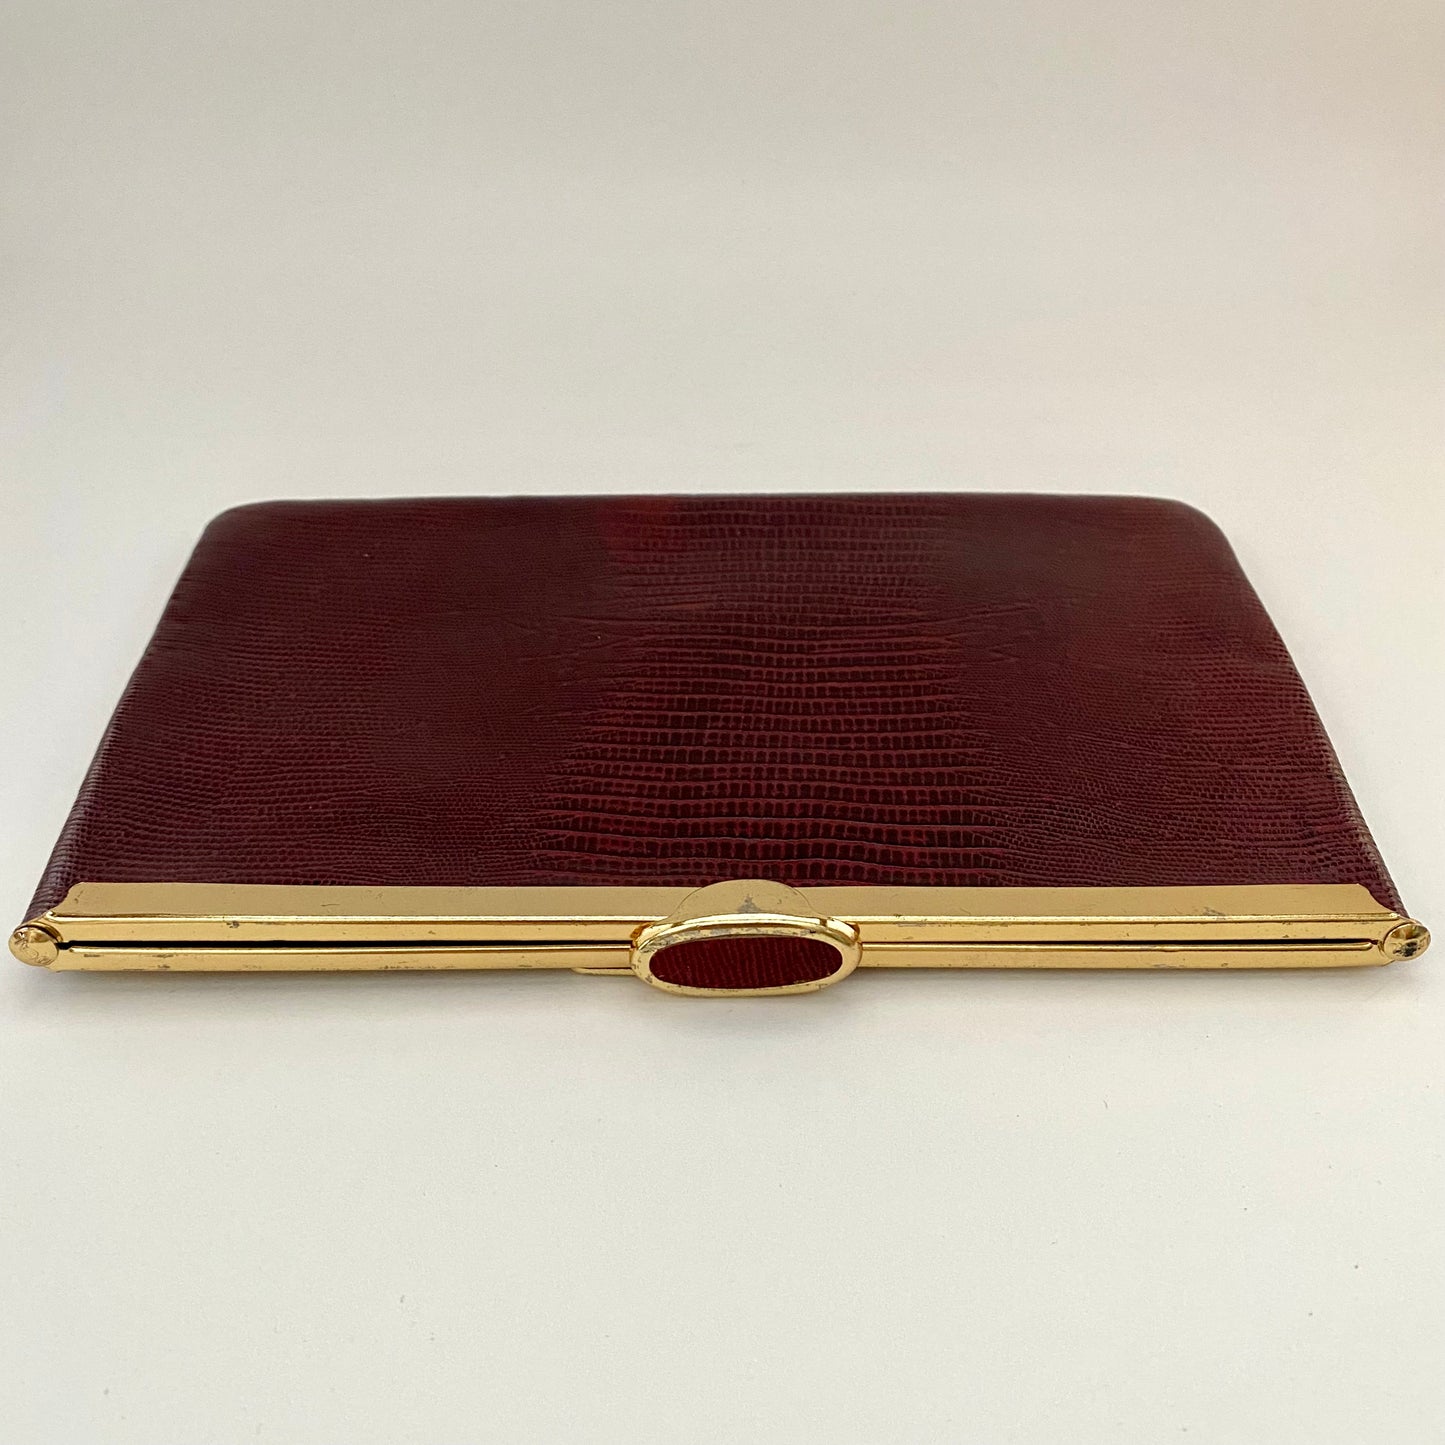 Late 60s/ Early 70s Etra, Genuine Leather Clutch